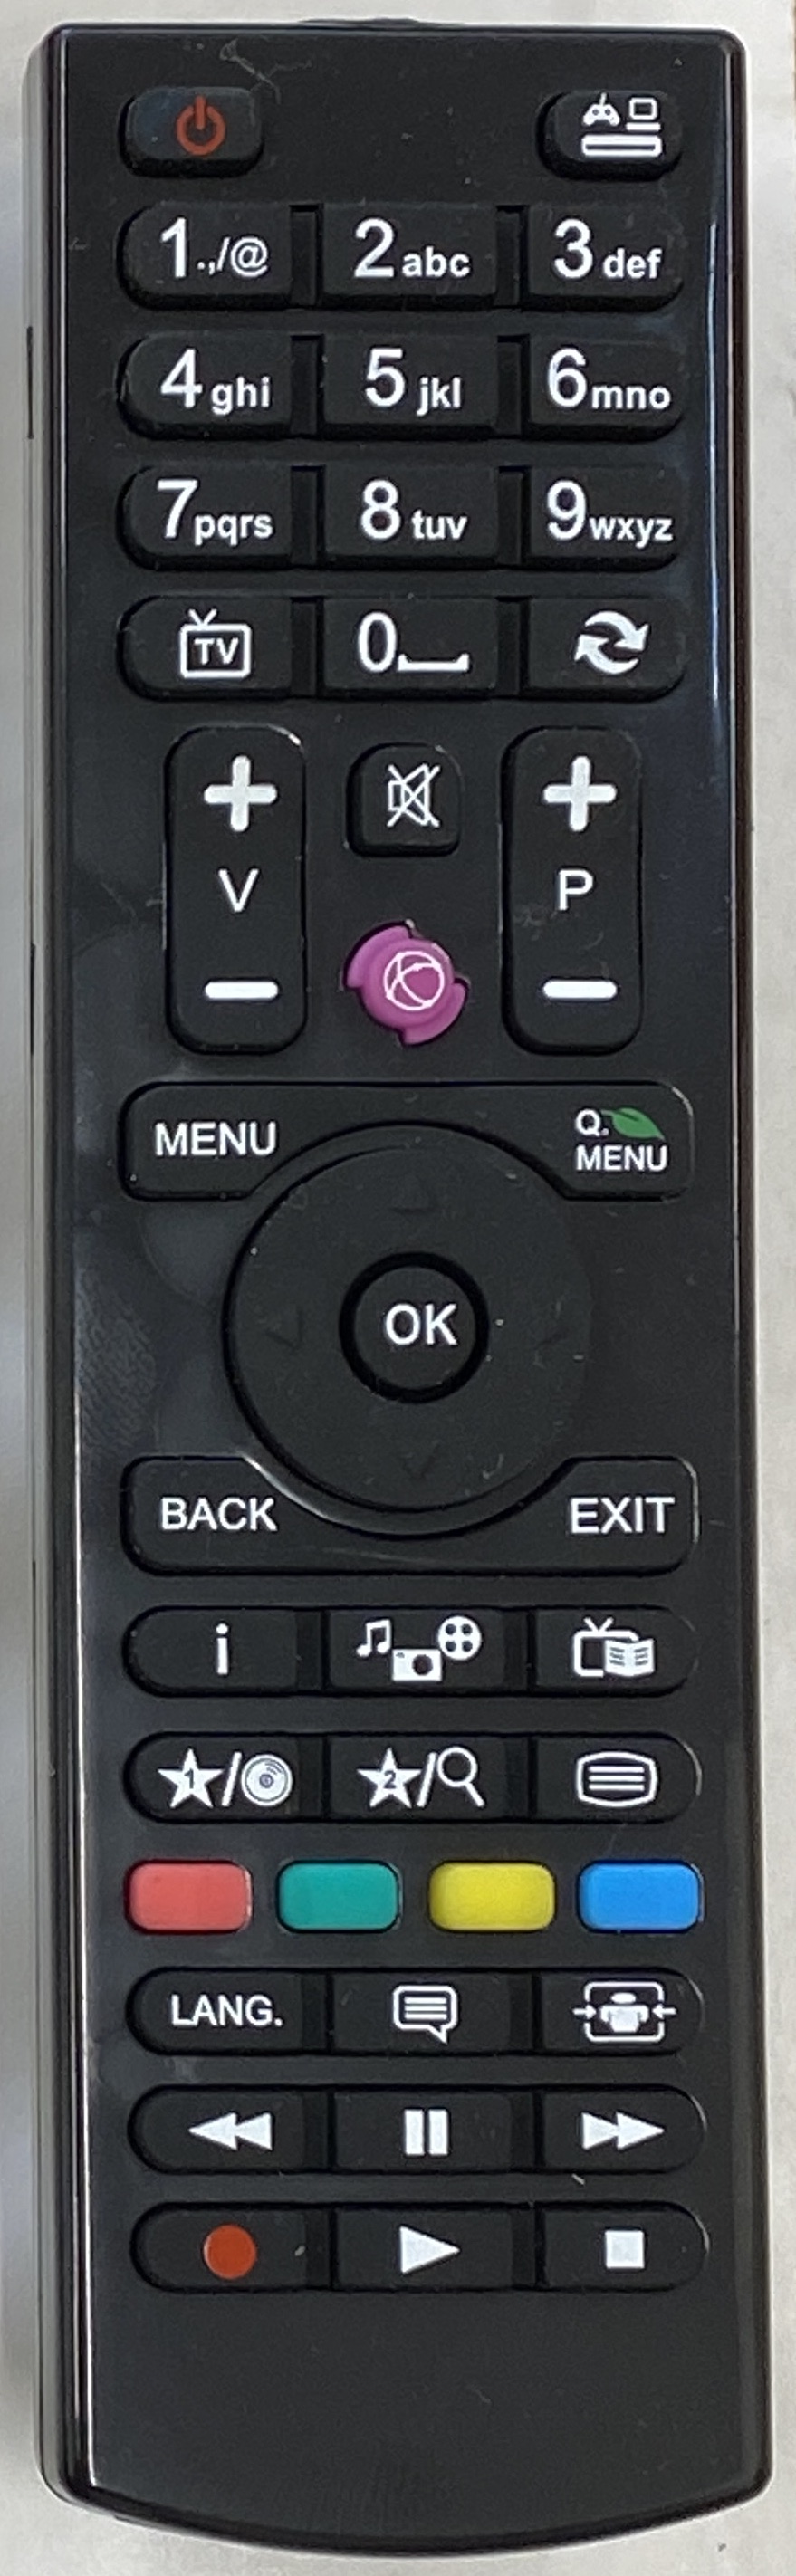 DIGIHOME 22272FHDDVDLED Remote Control Original